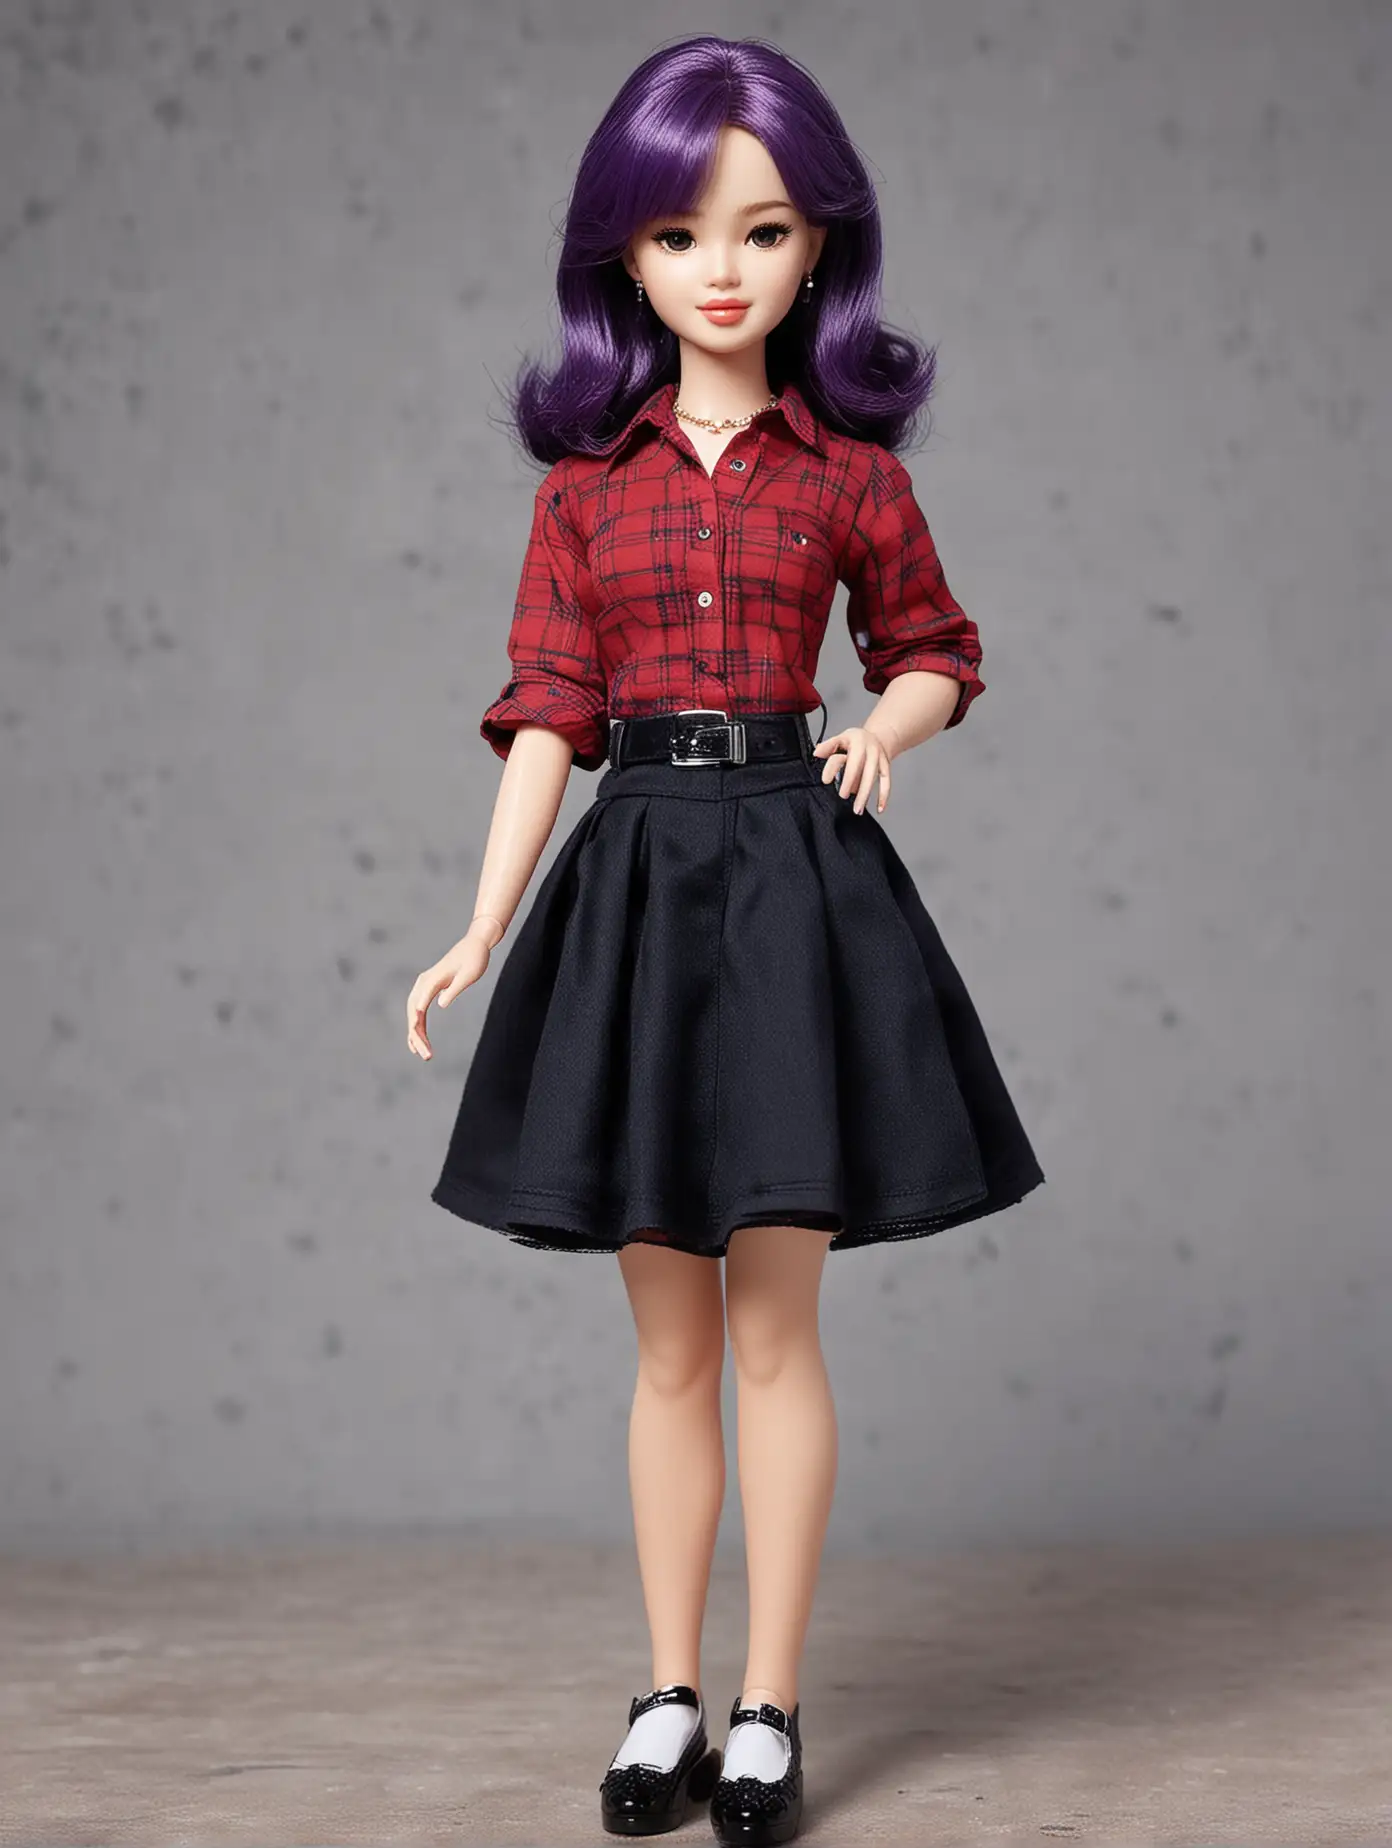 Chubby Teenage Barbie Doll with Sparkling Purple Hair in Red and Black Dress